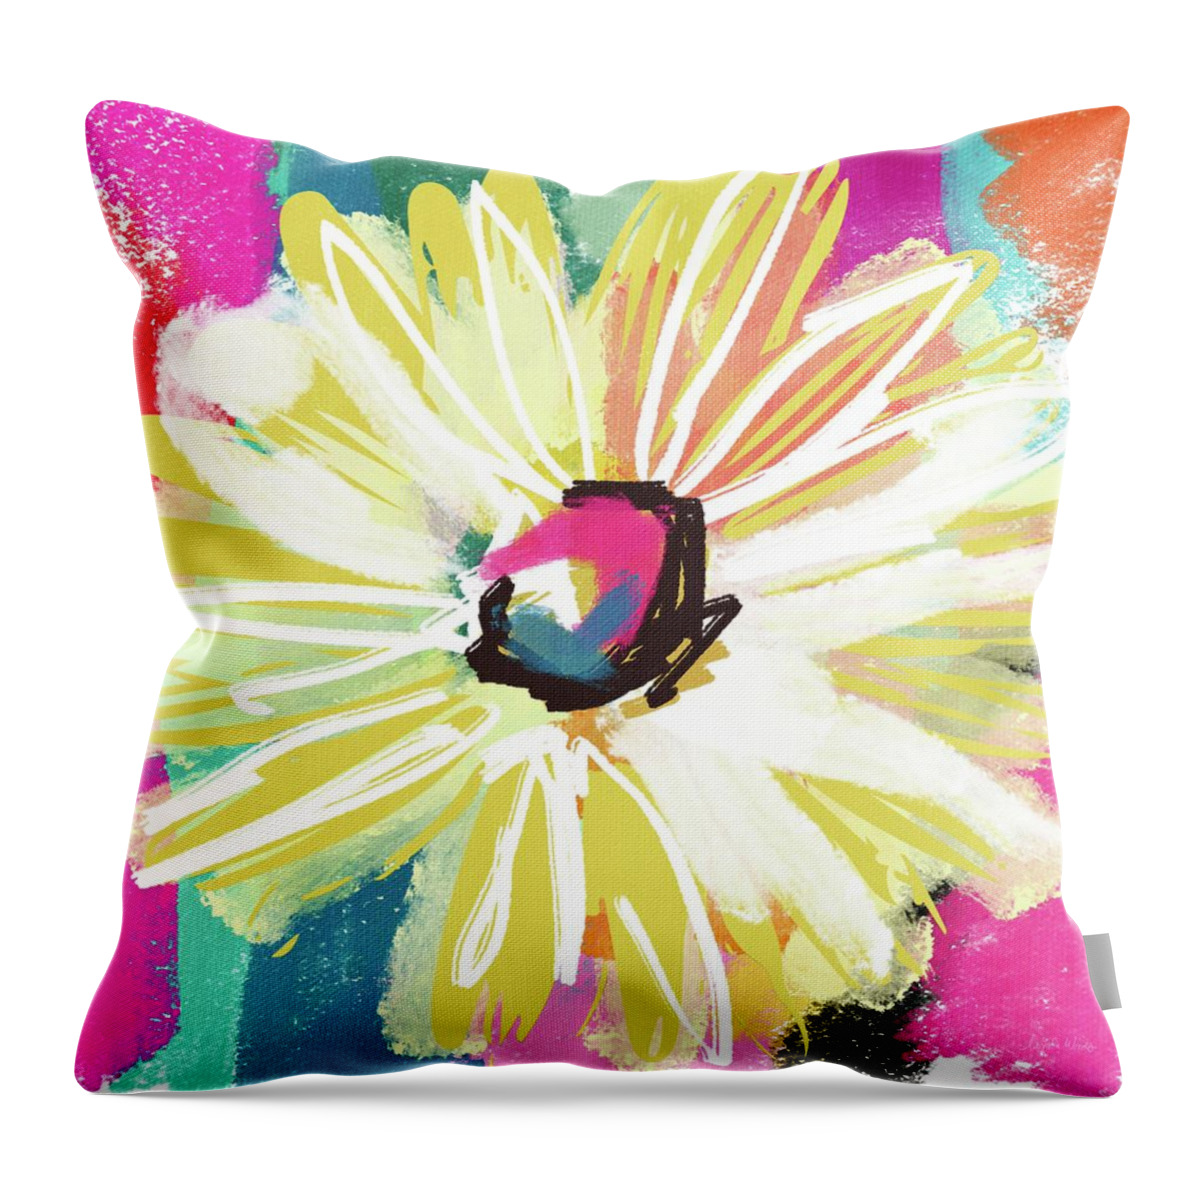 Flower Throw Pillow featuring the mixed media Bright Yellow Flower- Art by Linda Woods by Linda Woods